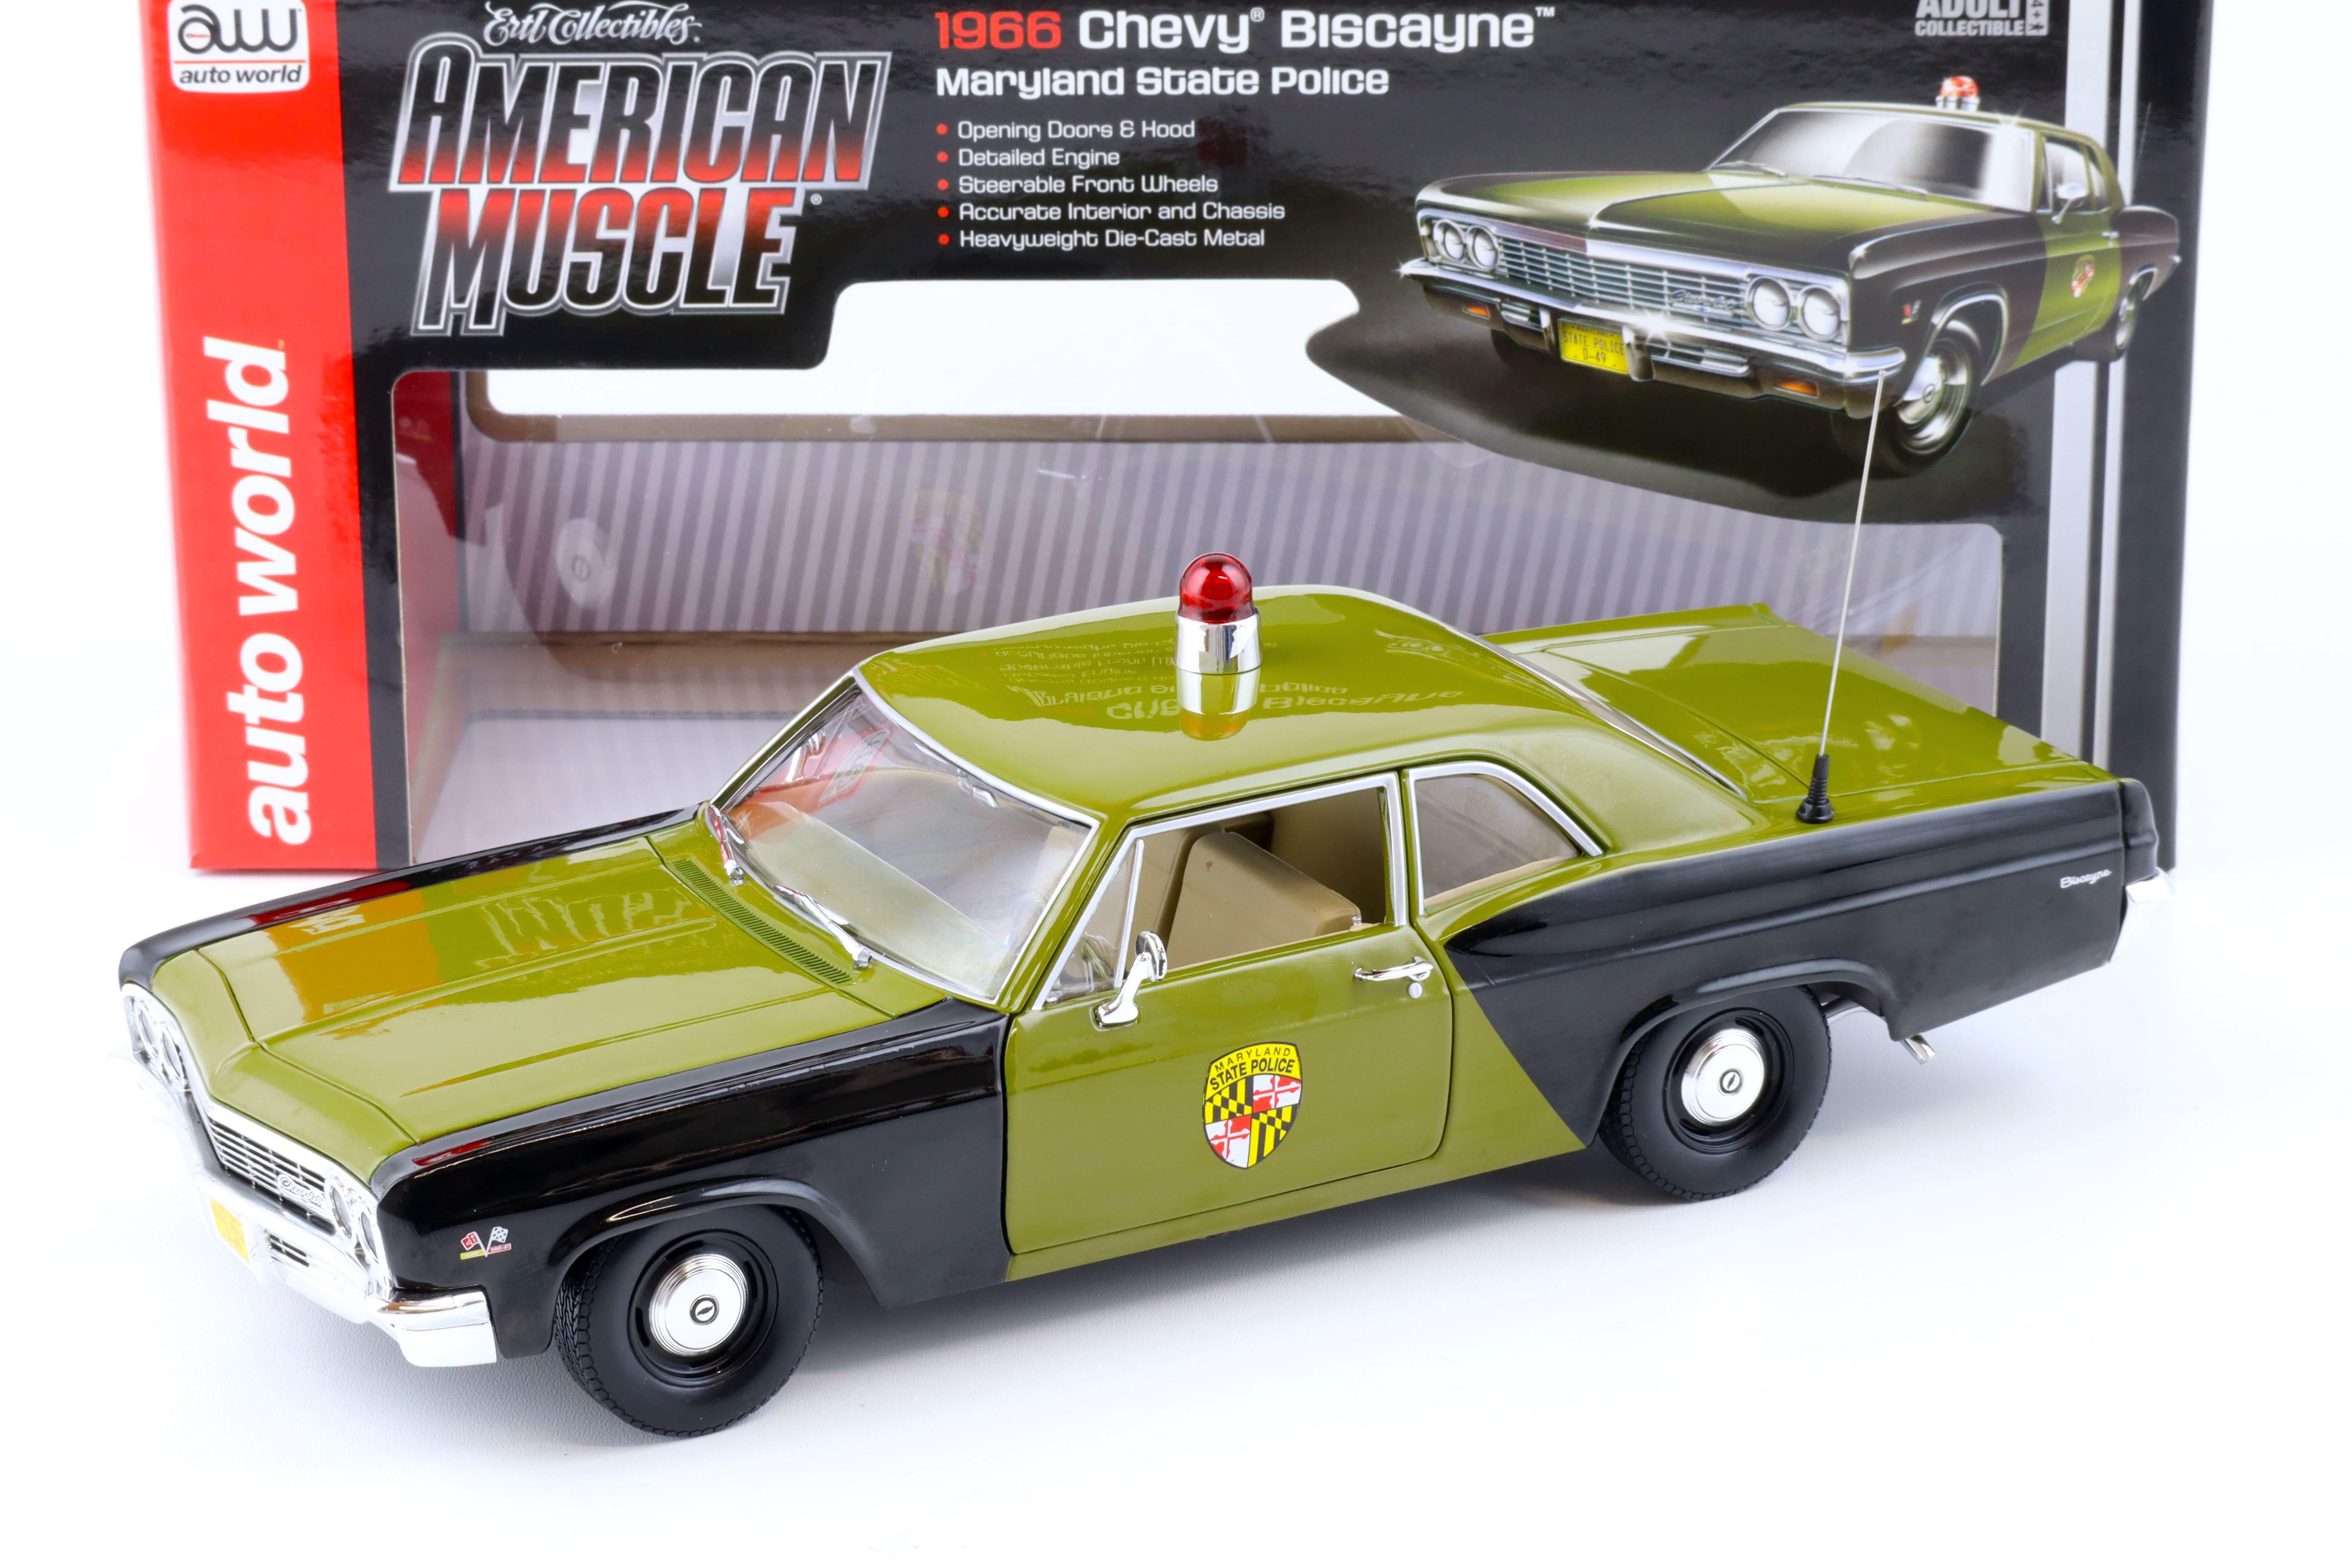 1:18 Auto World 1966 Chevrolet Chevy Biscayne Maryland State Police green